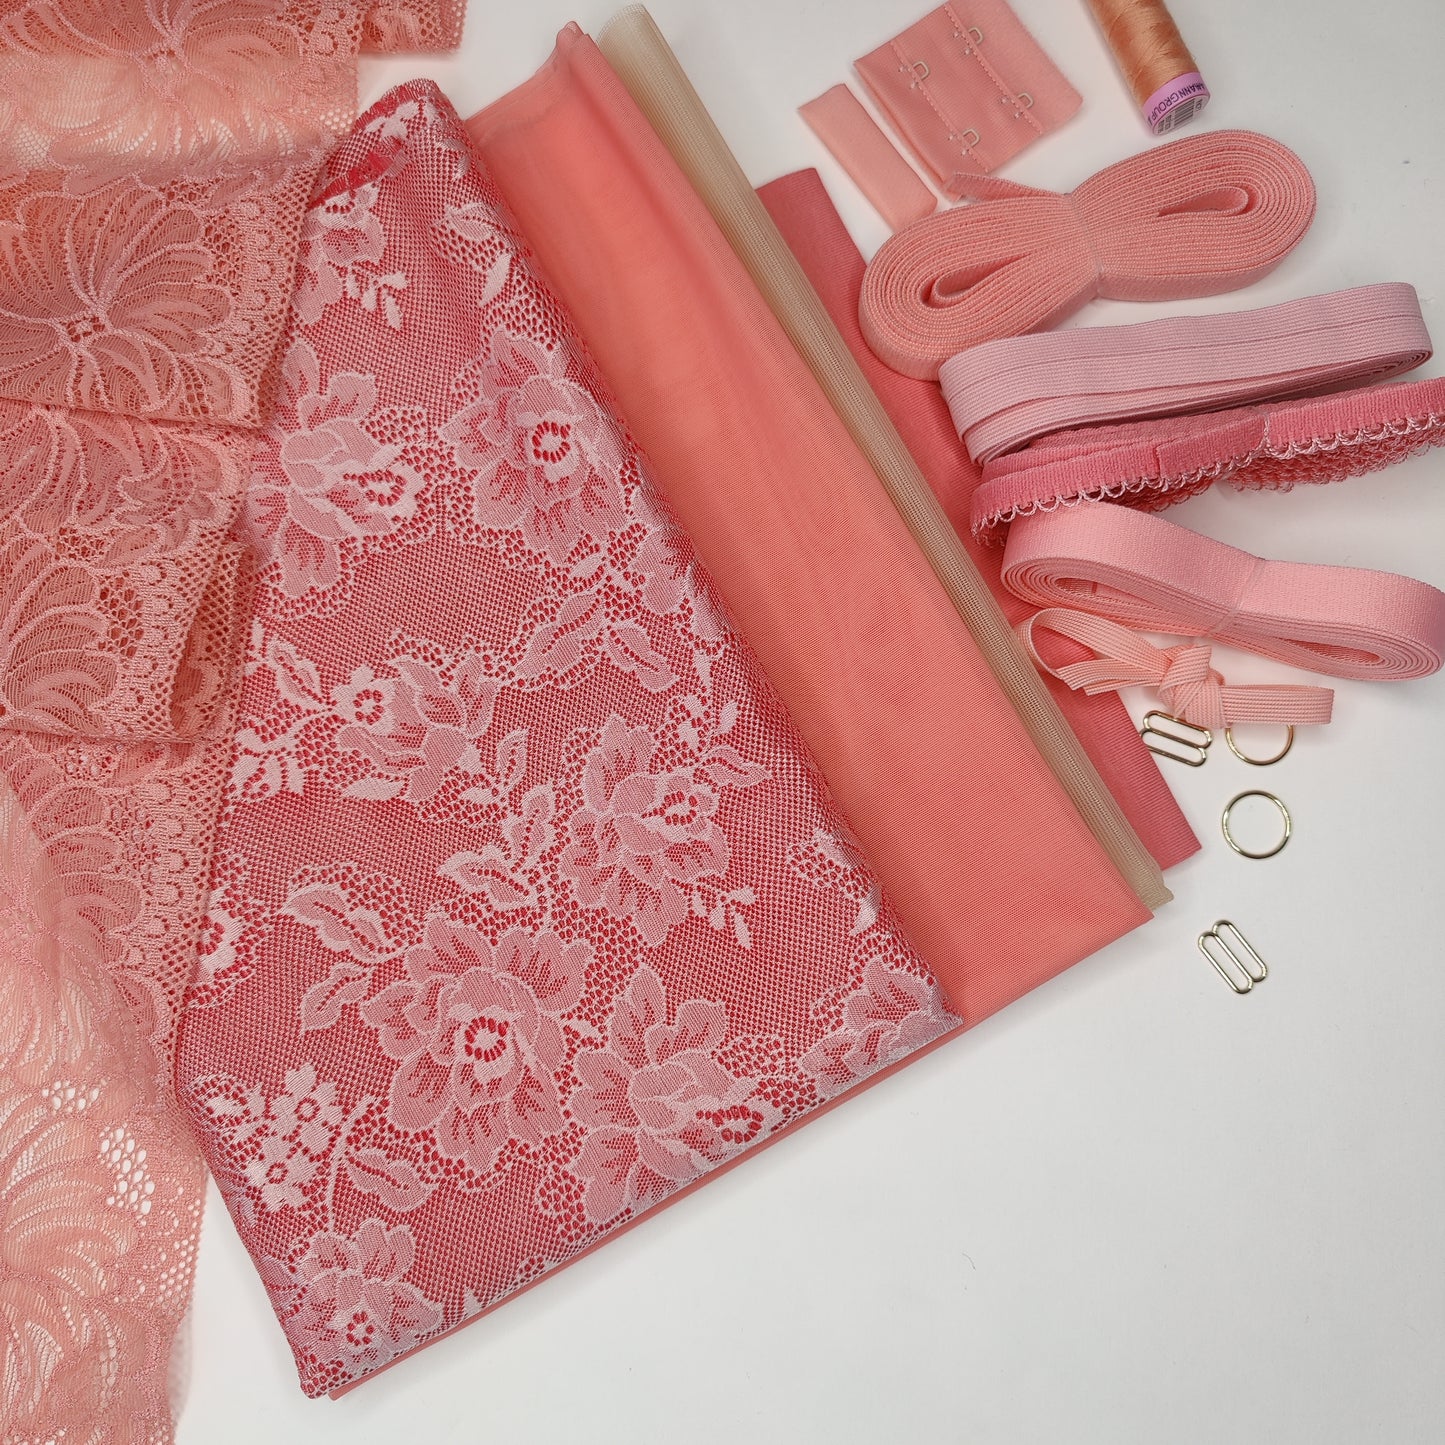 Large sewing set for 2x bras and panties or sewing package with <tc>lace</tc>, powernet and structured fabric in coral IDnsx1